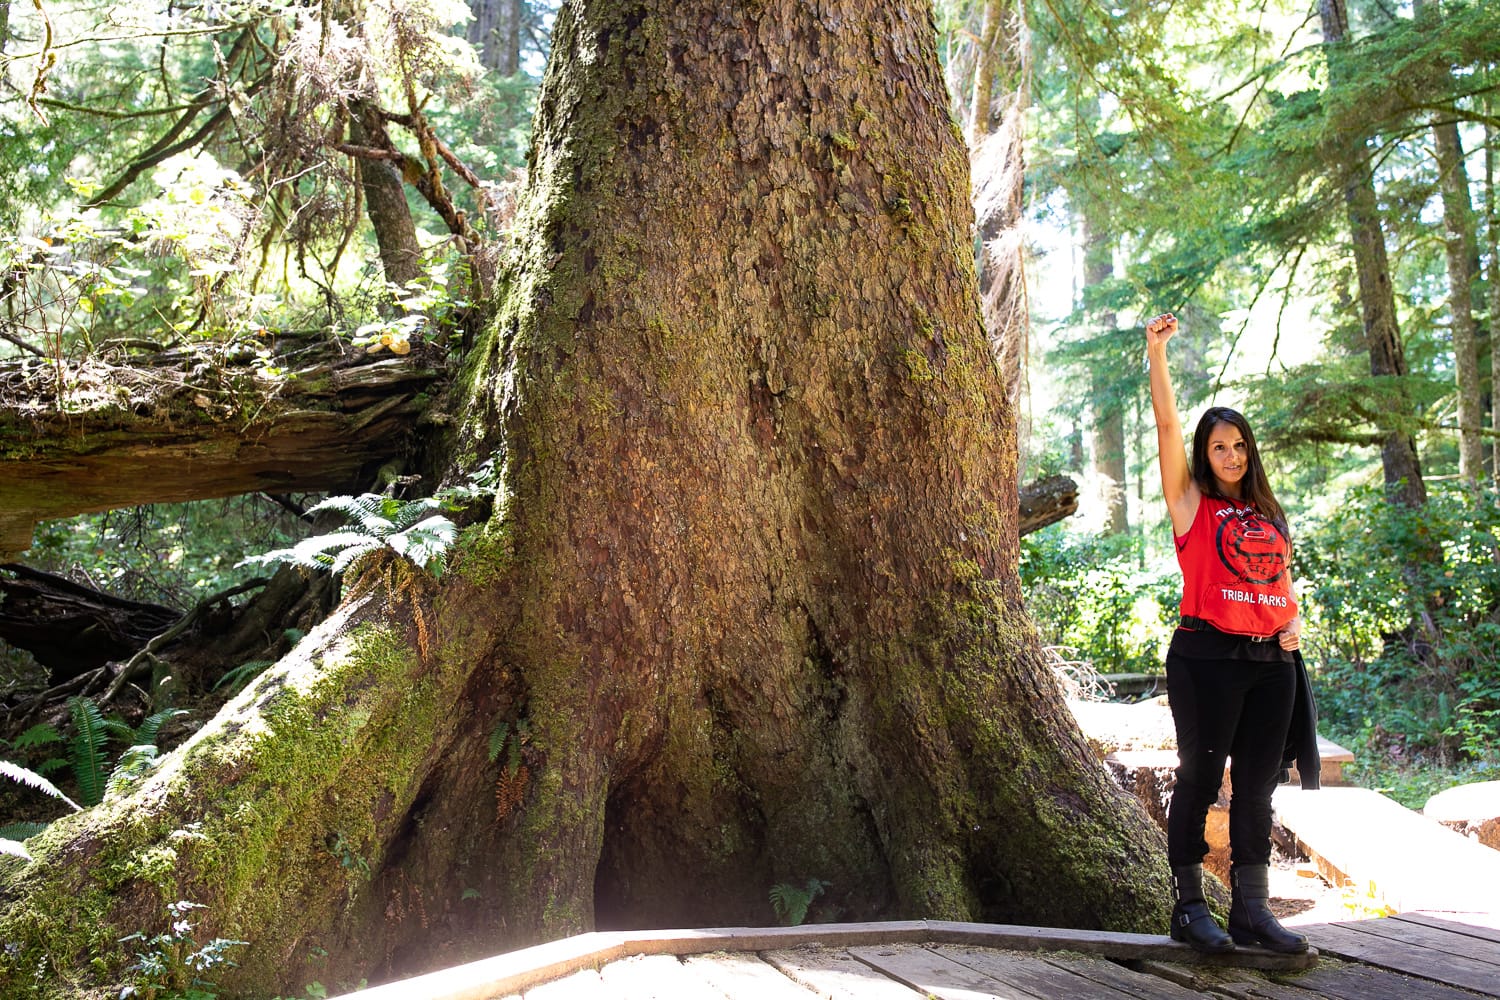 Photo of a person wearing an orange shirt with their hands in the air. They are standing beside a giant Red Cedar tree and look very small beside the large, moss covered tree.